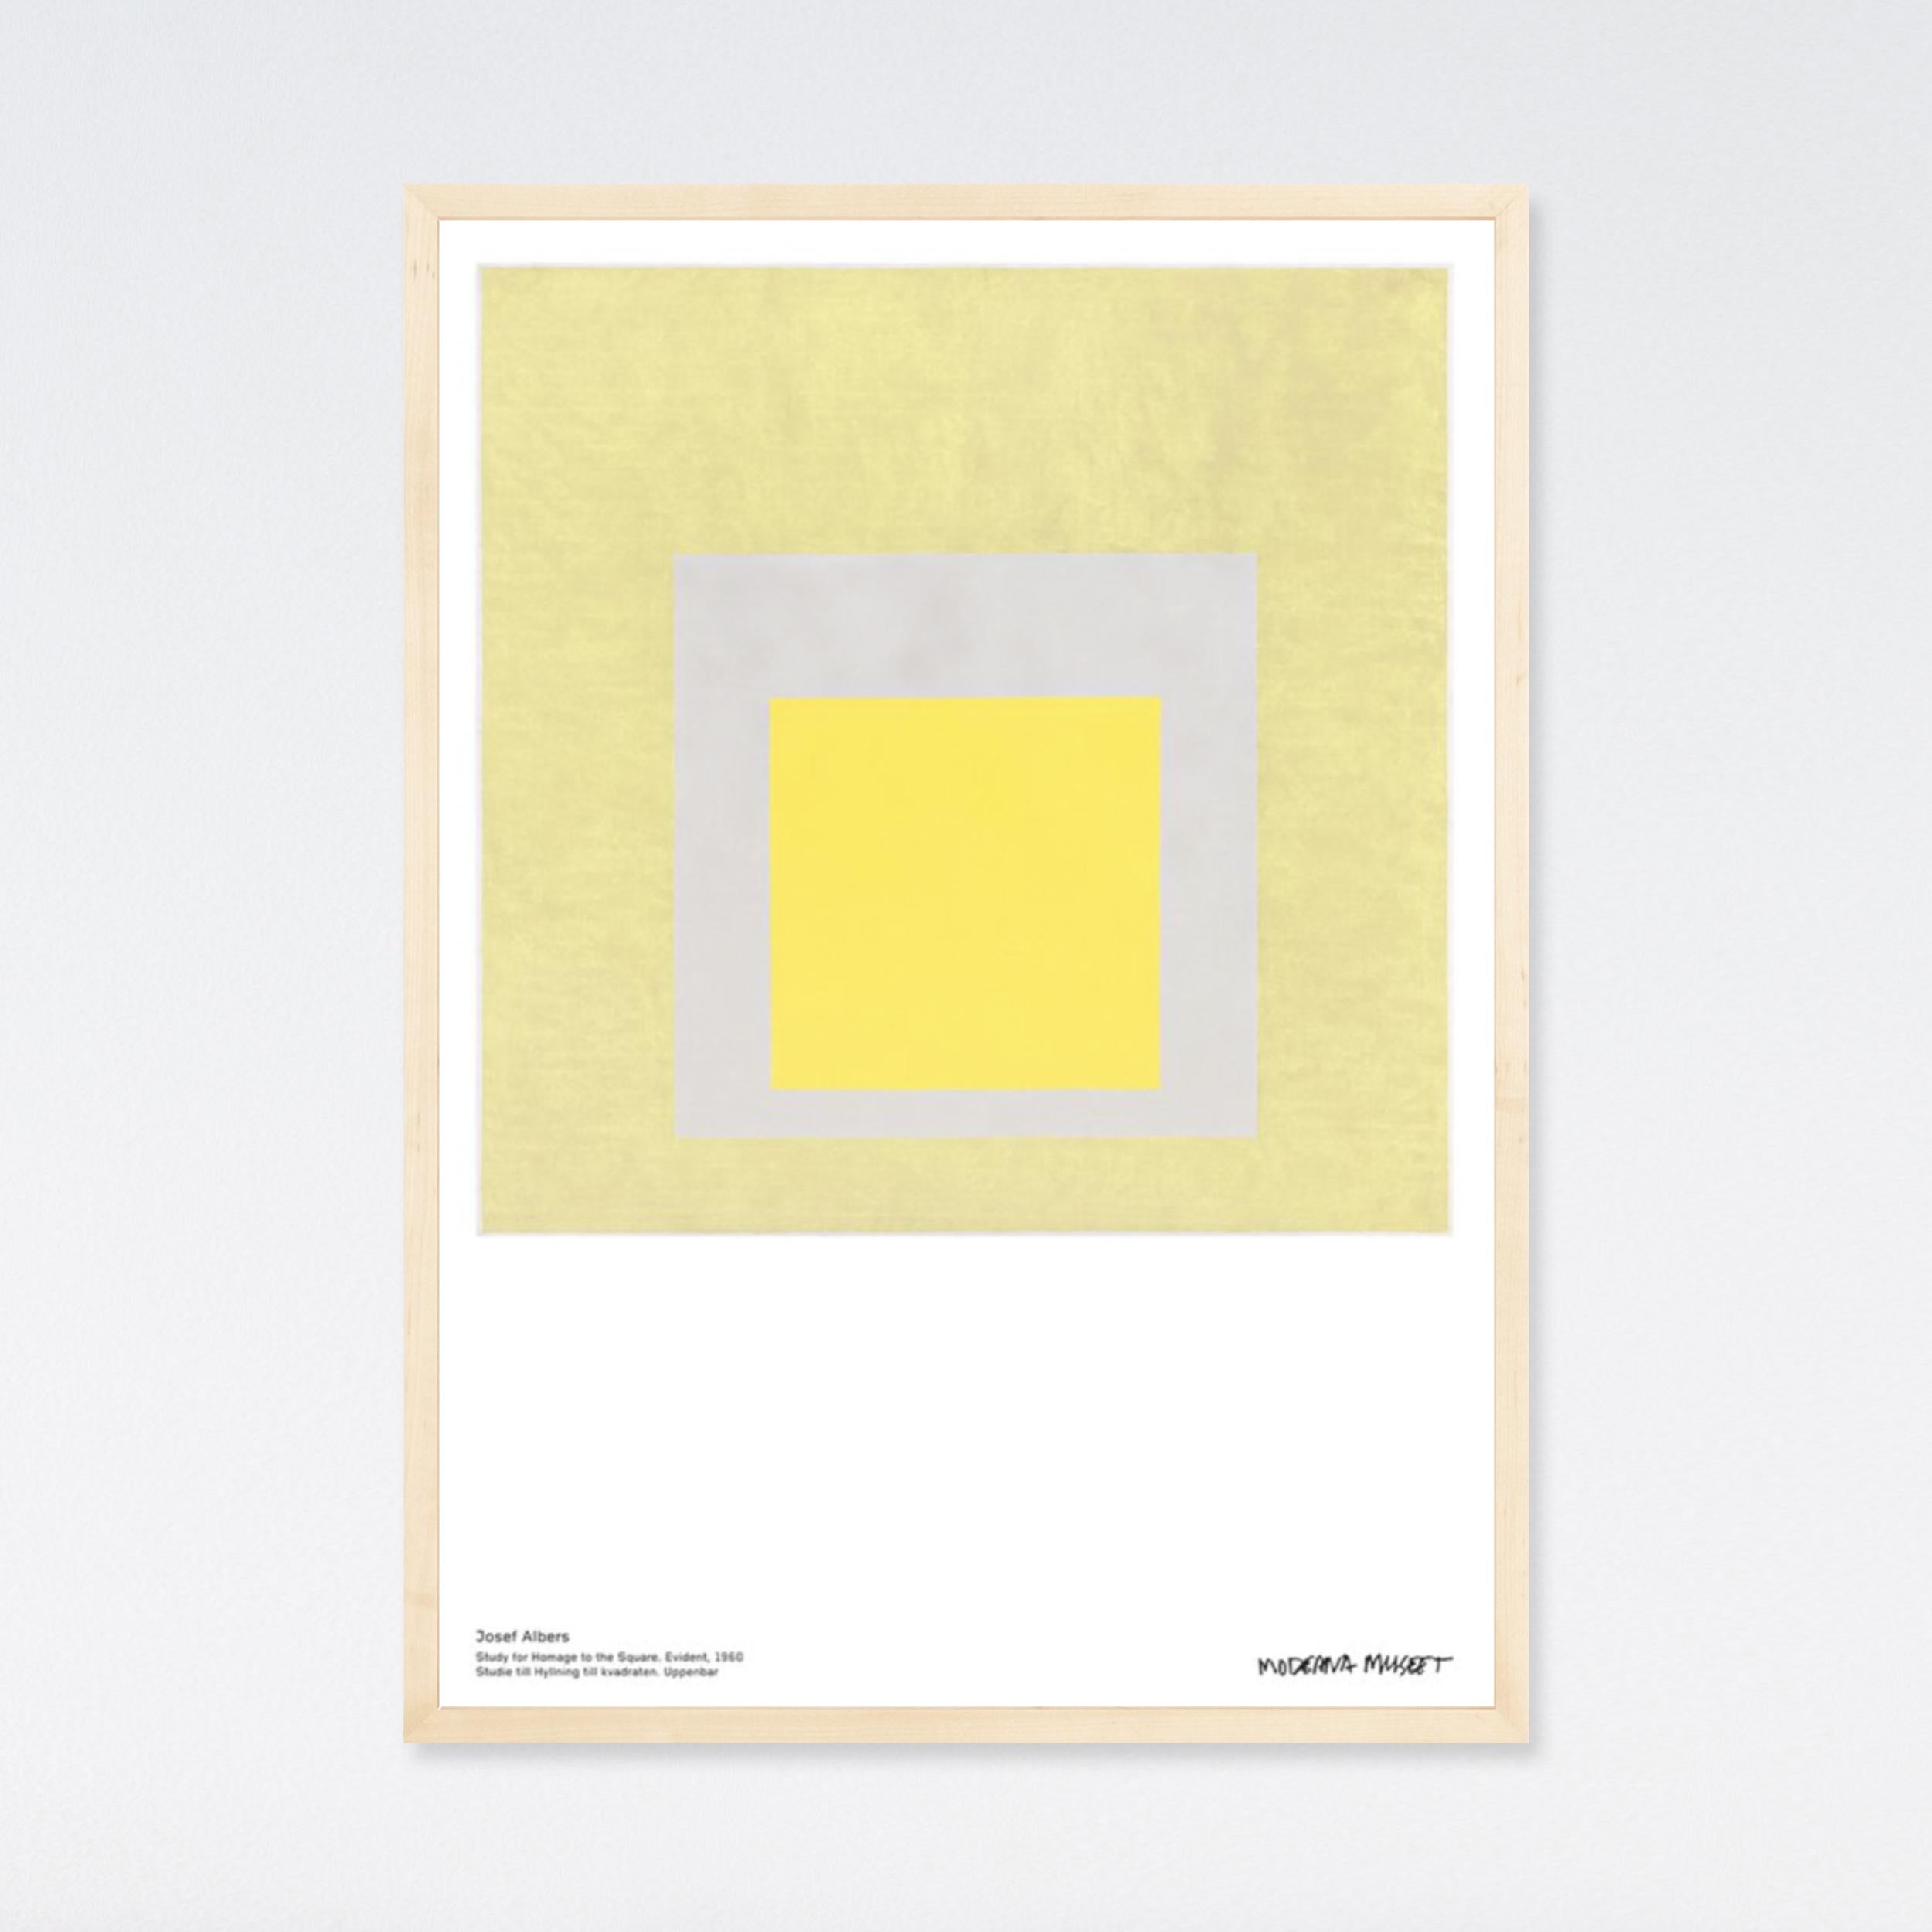 Josef Albers, Museum Poster Study for Homage to the Square, Yellow Gray Minimal 1